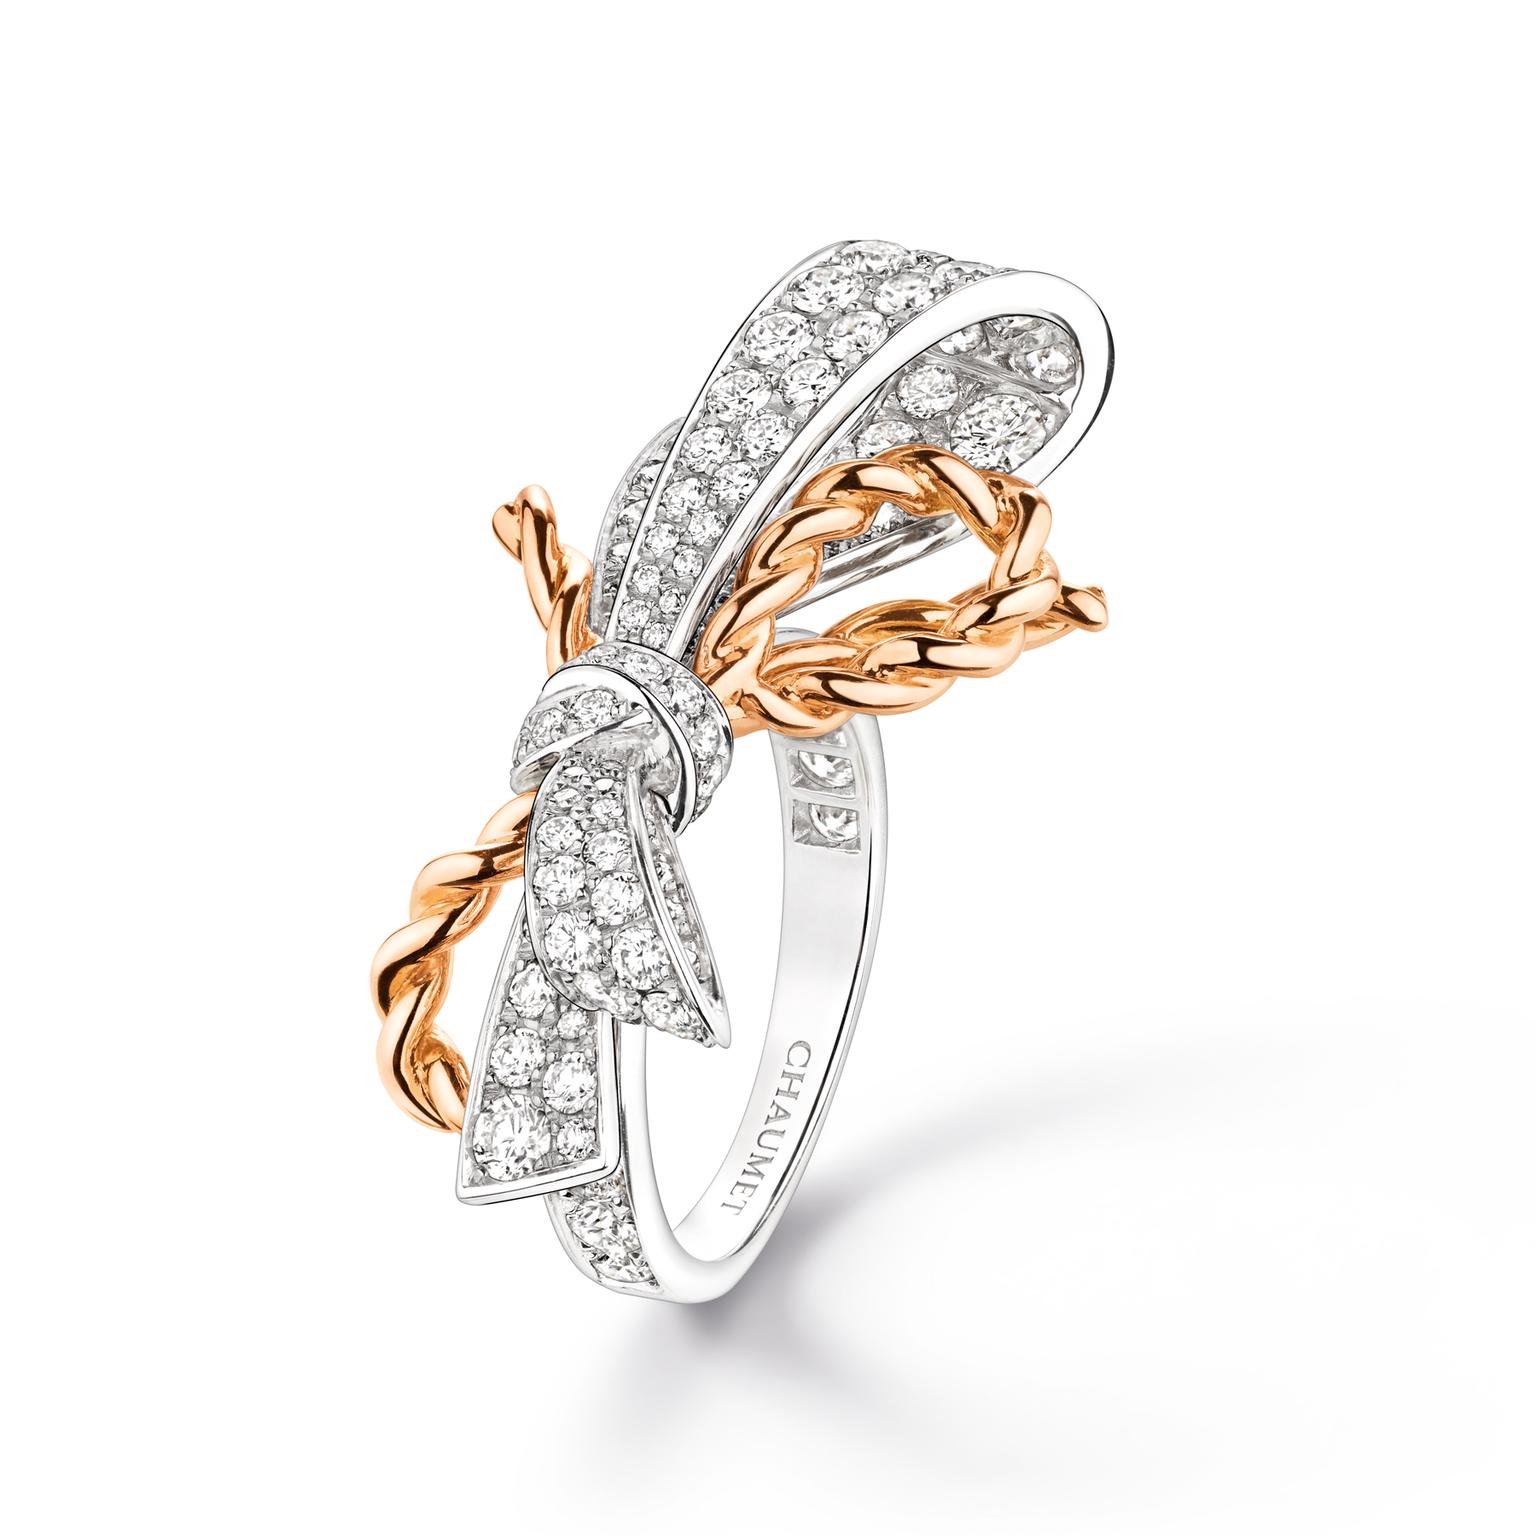 Chaumet Insolence ring